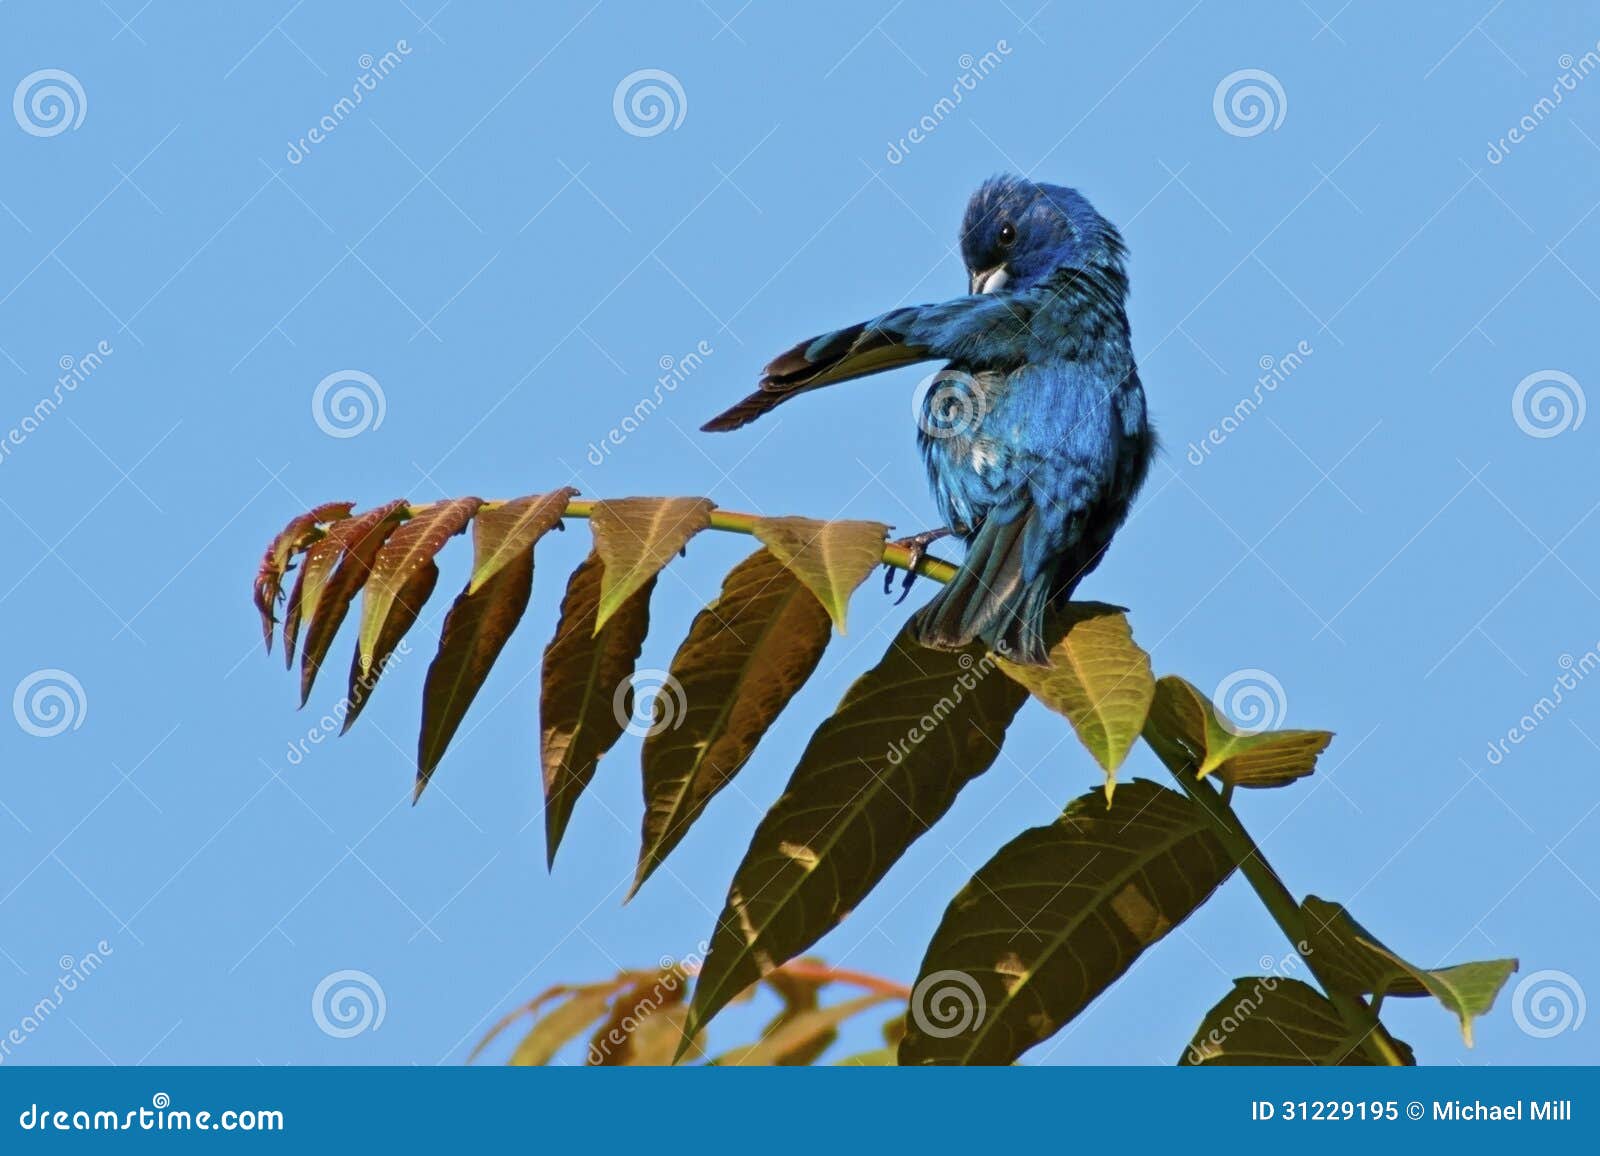 Indigo Bunting preening feathers with blue sky background